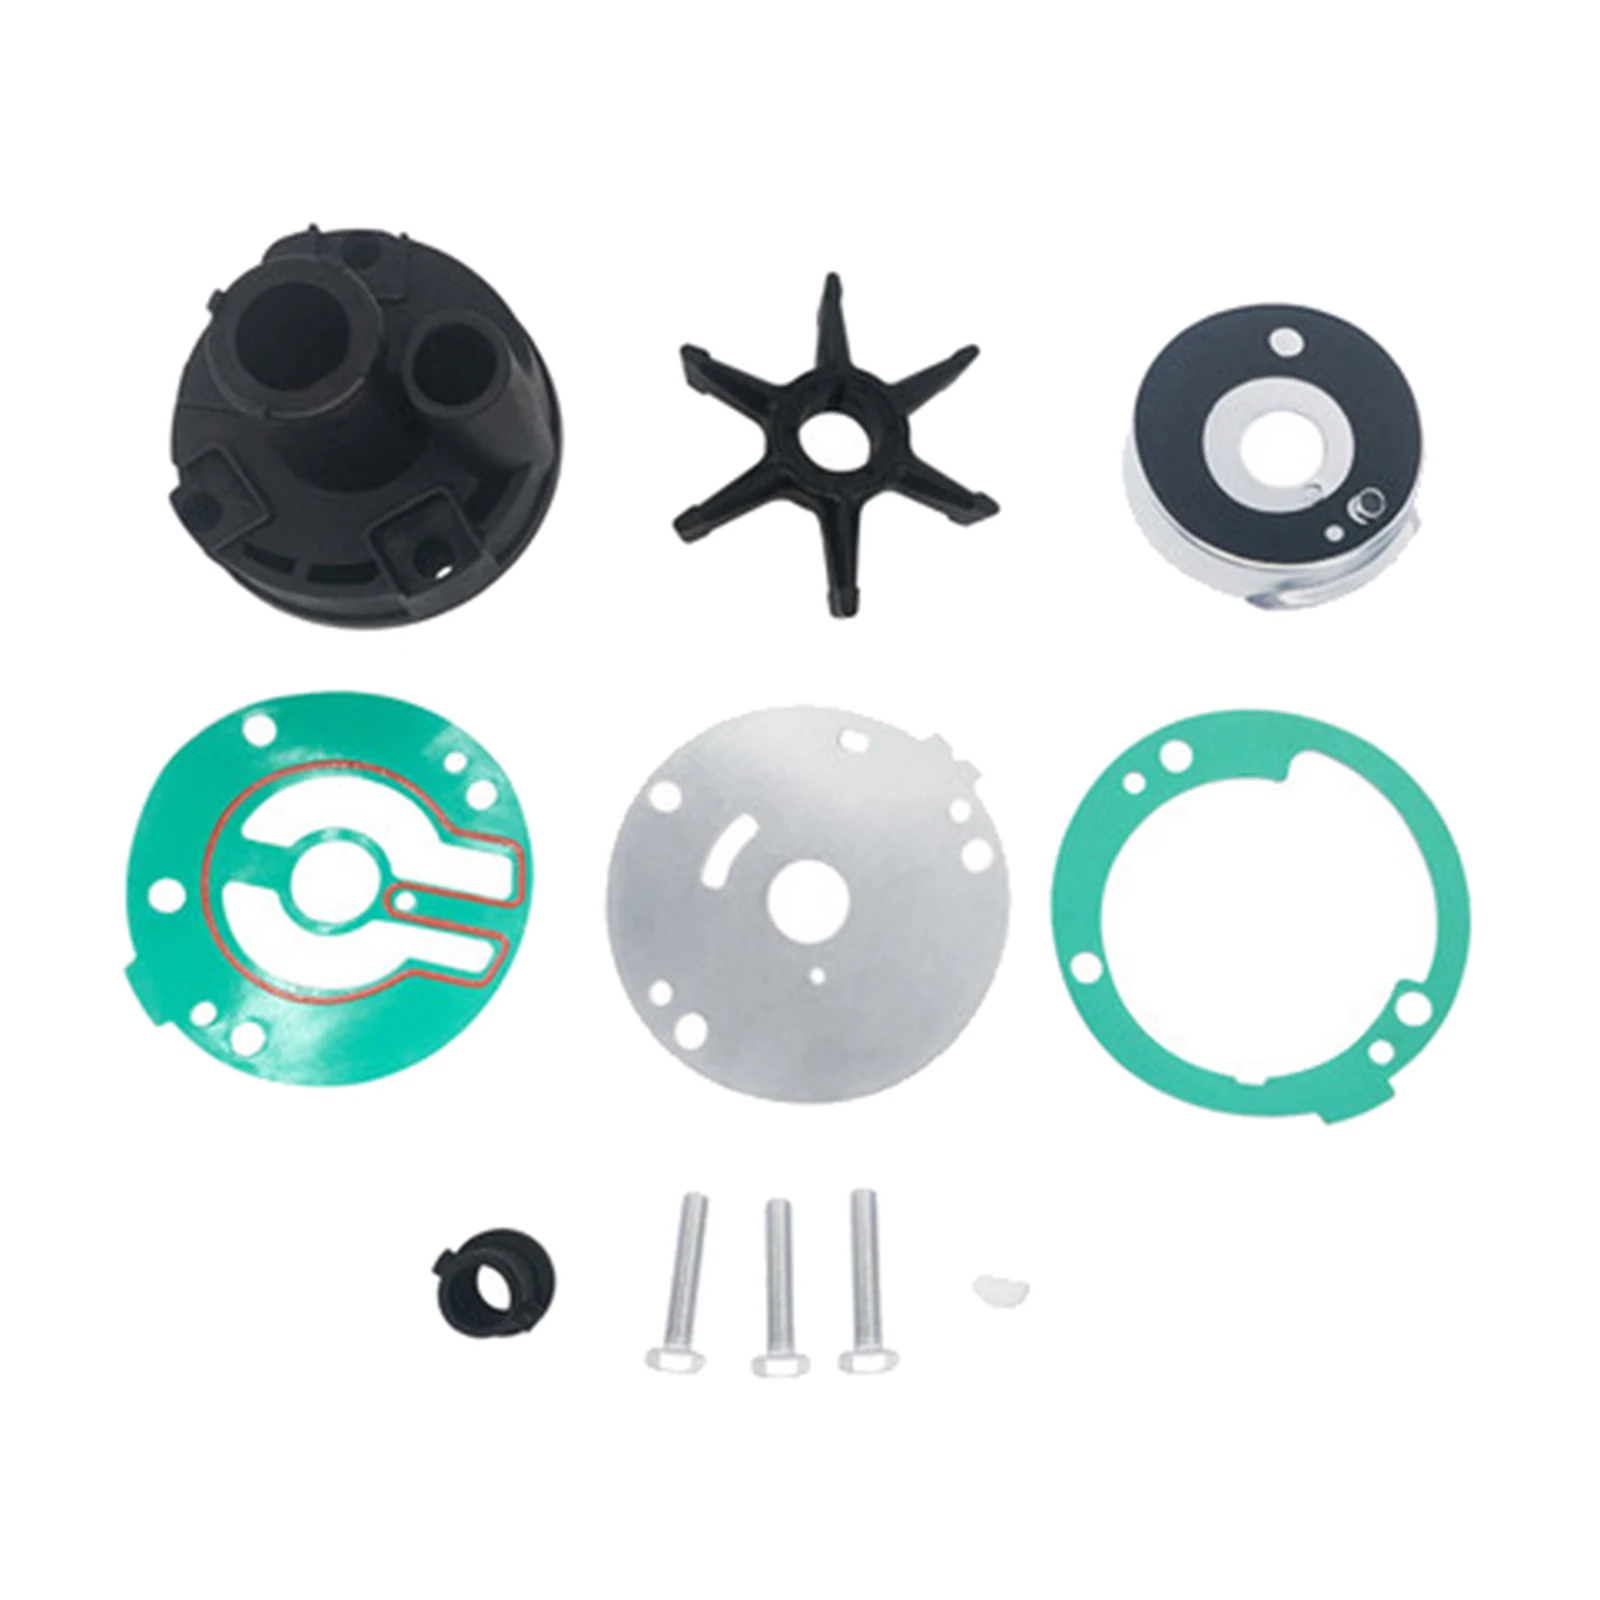 689-W0078 Water Pump Impeller Repair Kit for Yamaha 25HP 30HP 18-3427 689-W0078-04-00 689-W0078-06 Outboard Engines Replace